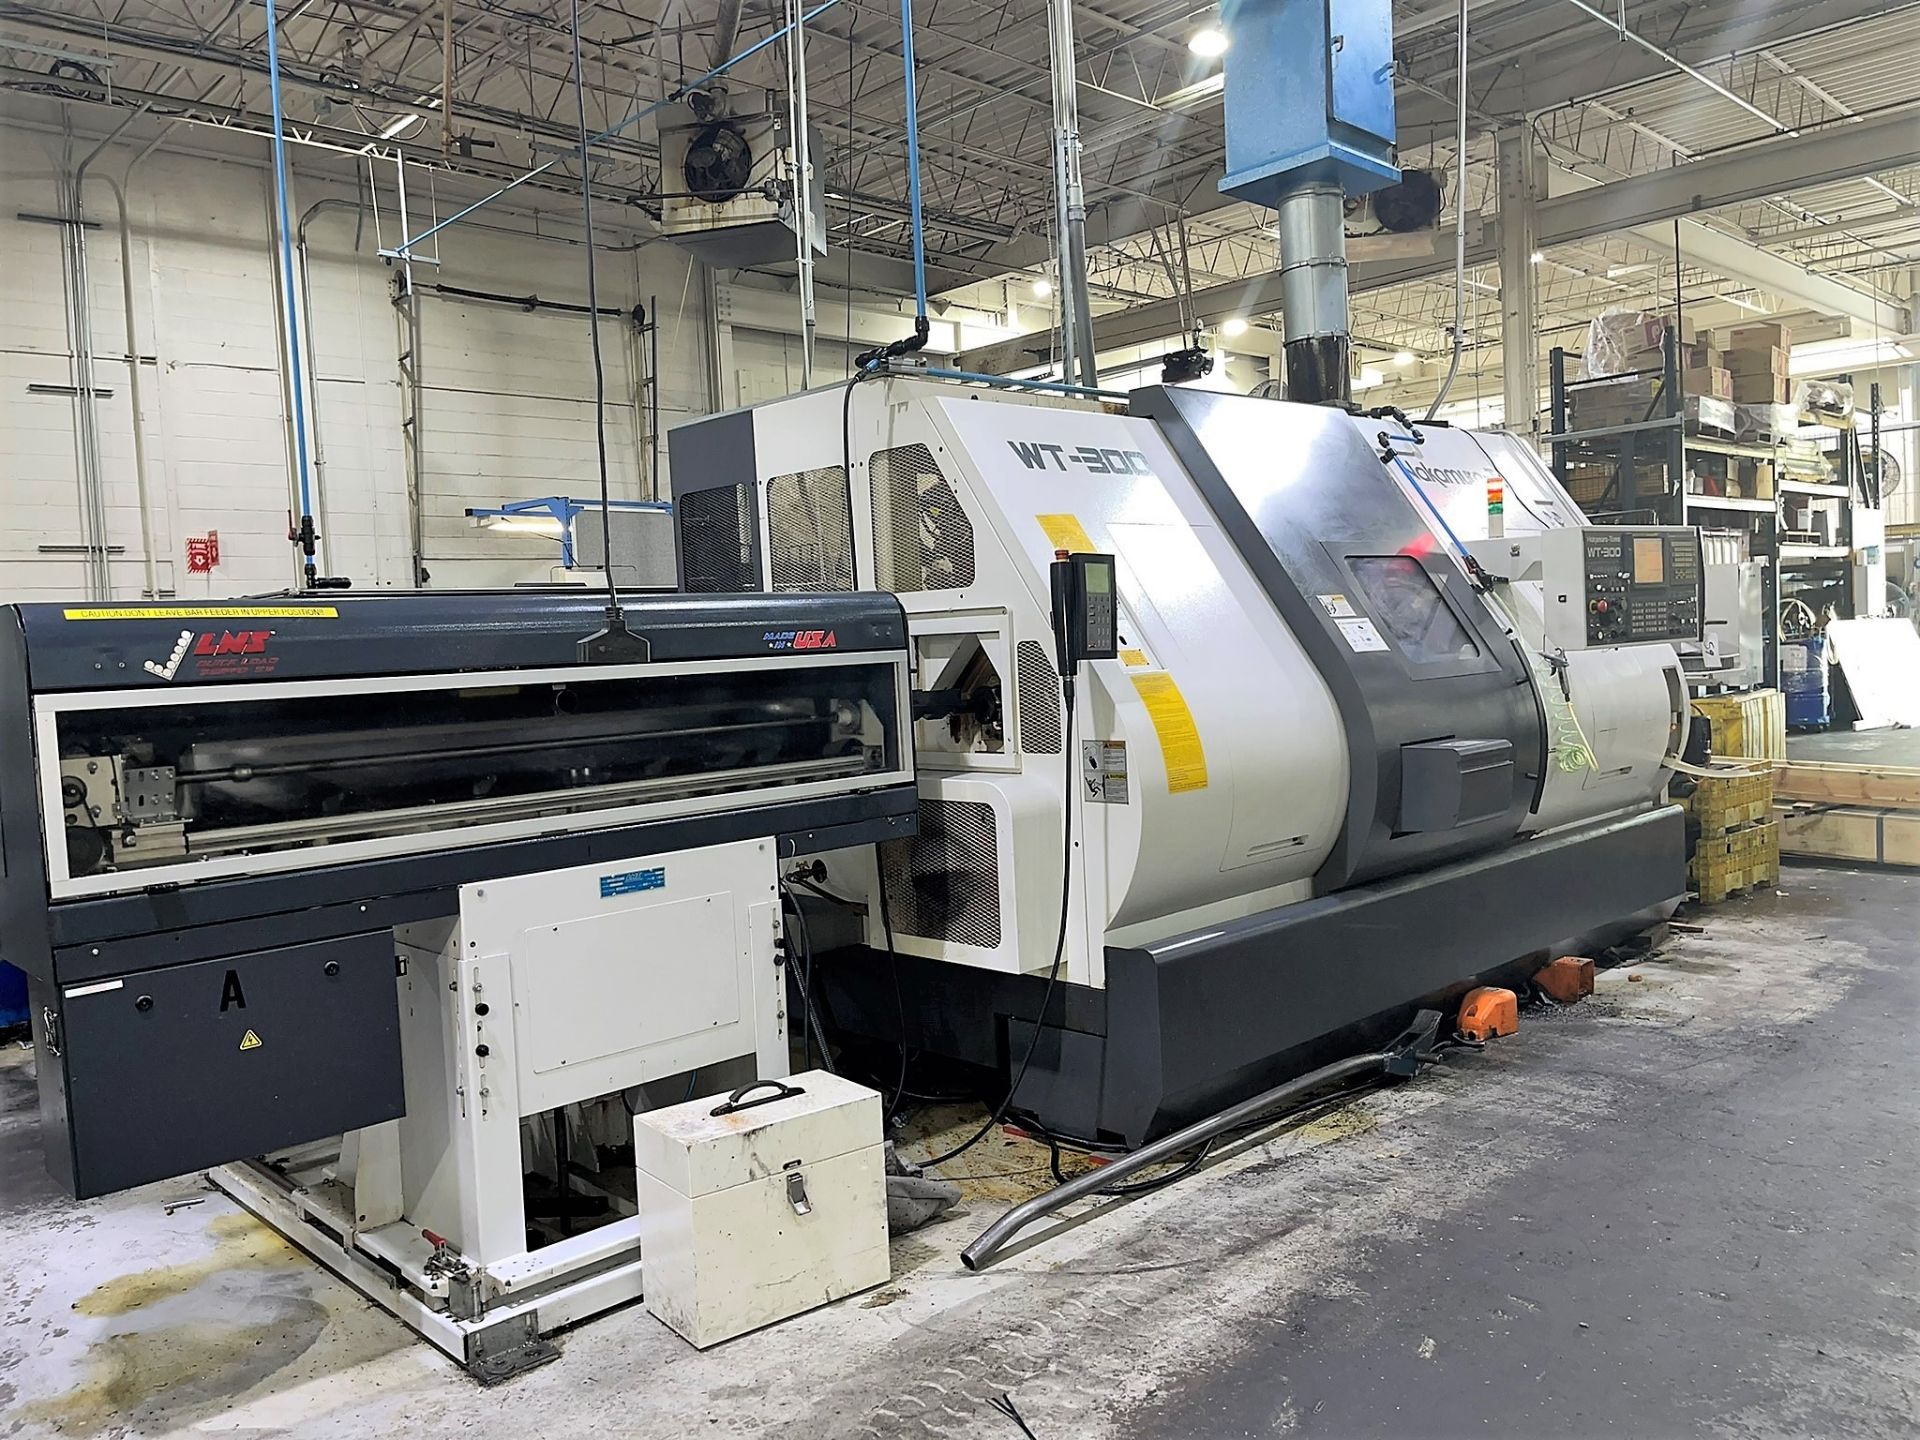 2011 Nakamura Tome WT-300 8-Axis CNC Turning/Milling Center, S/N M302803